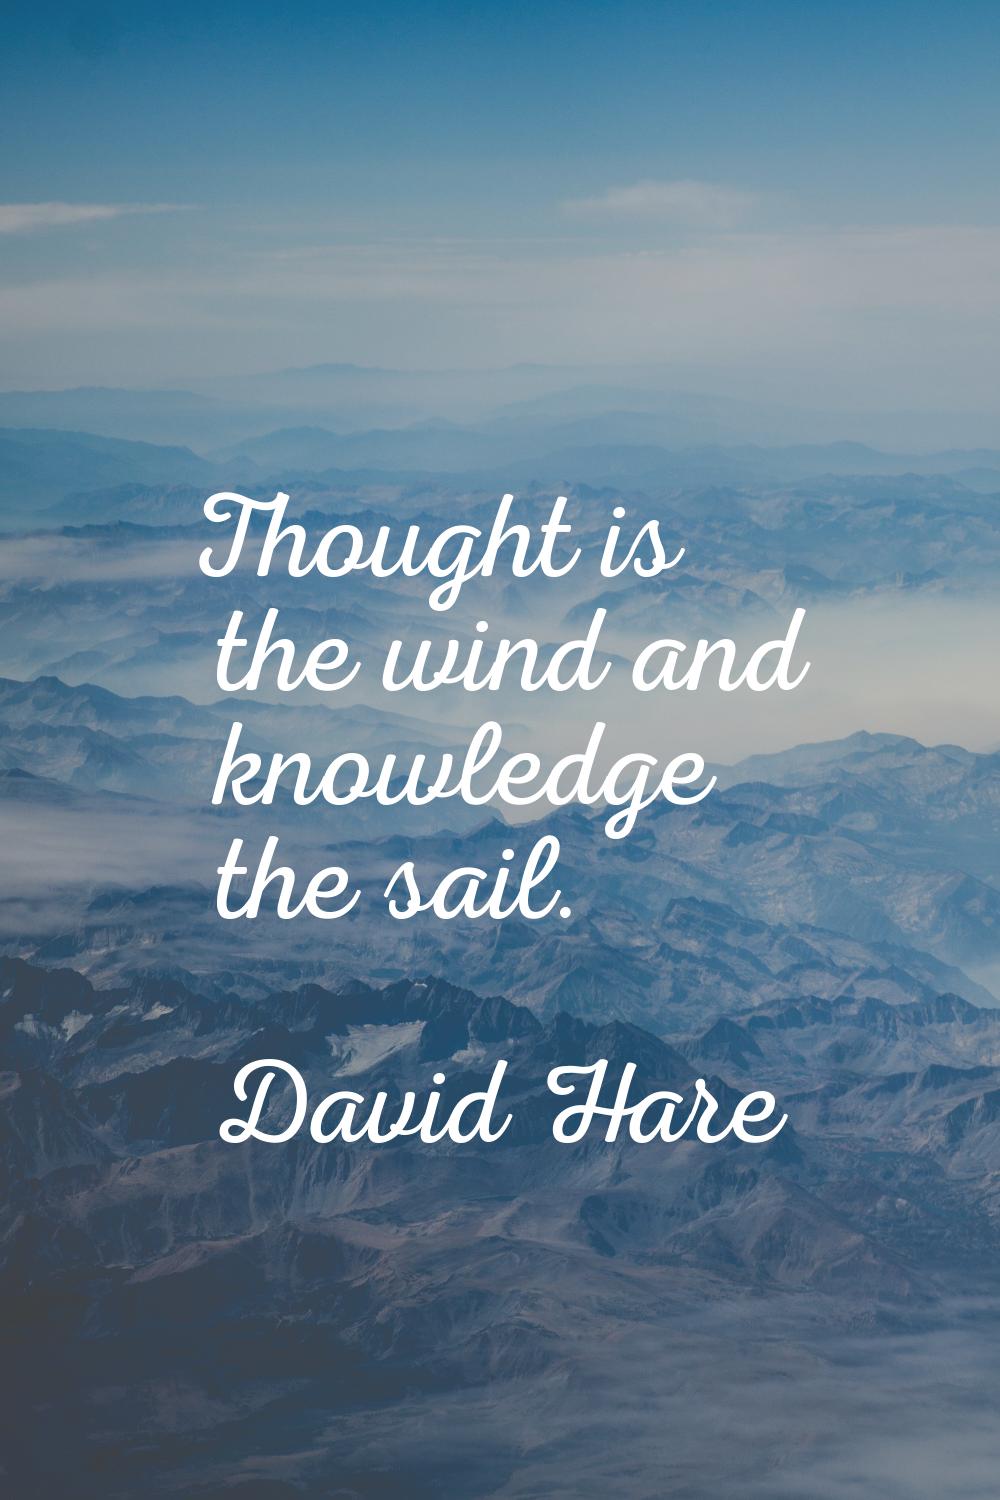 Thought is the wind and knowledge the sail.